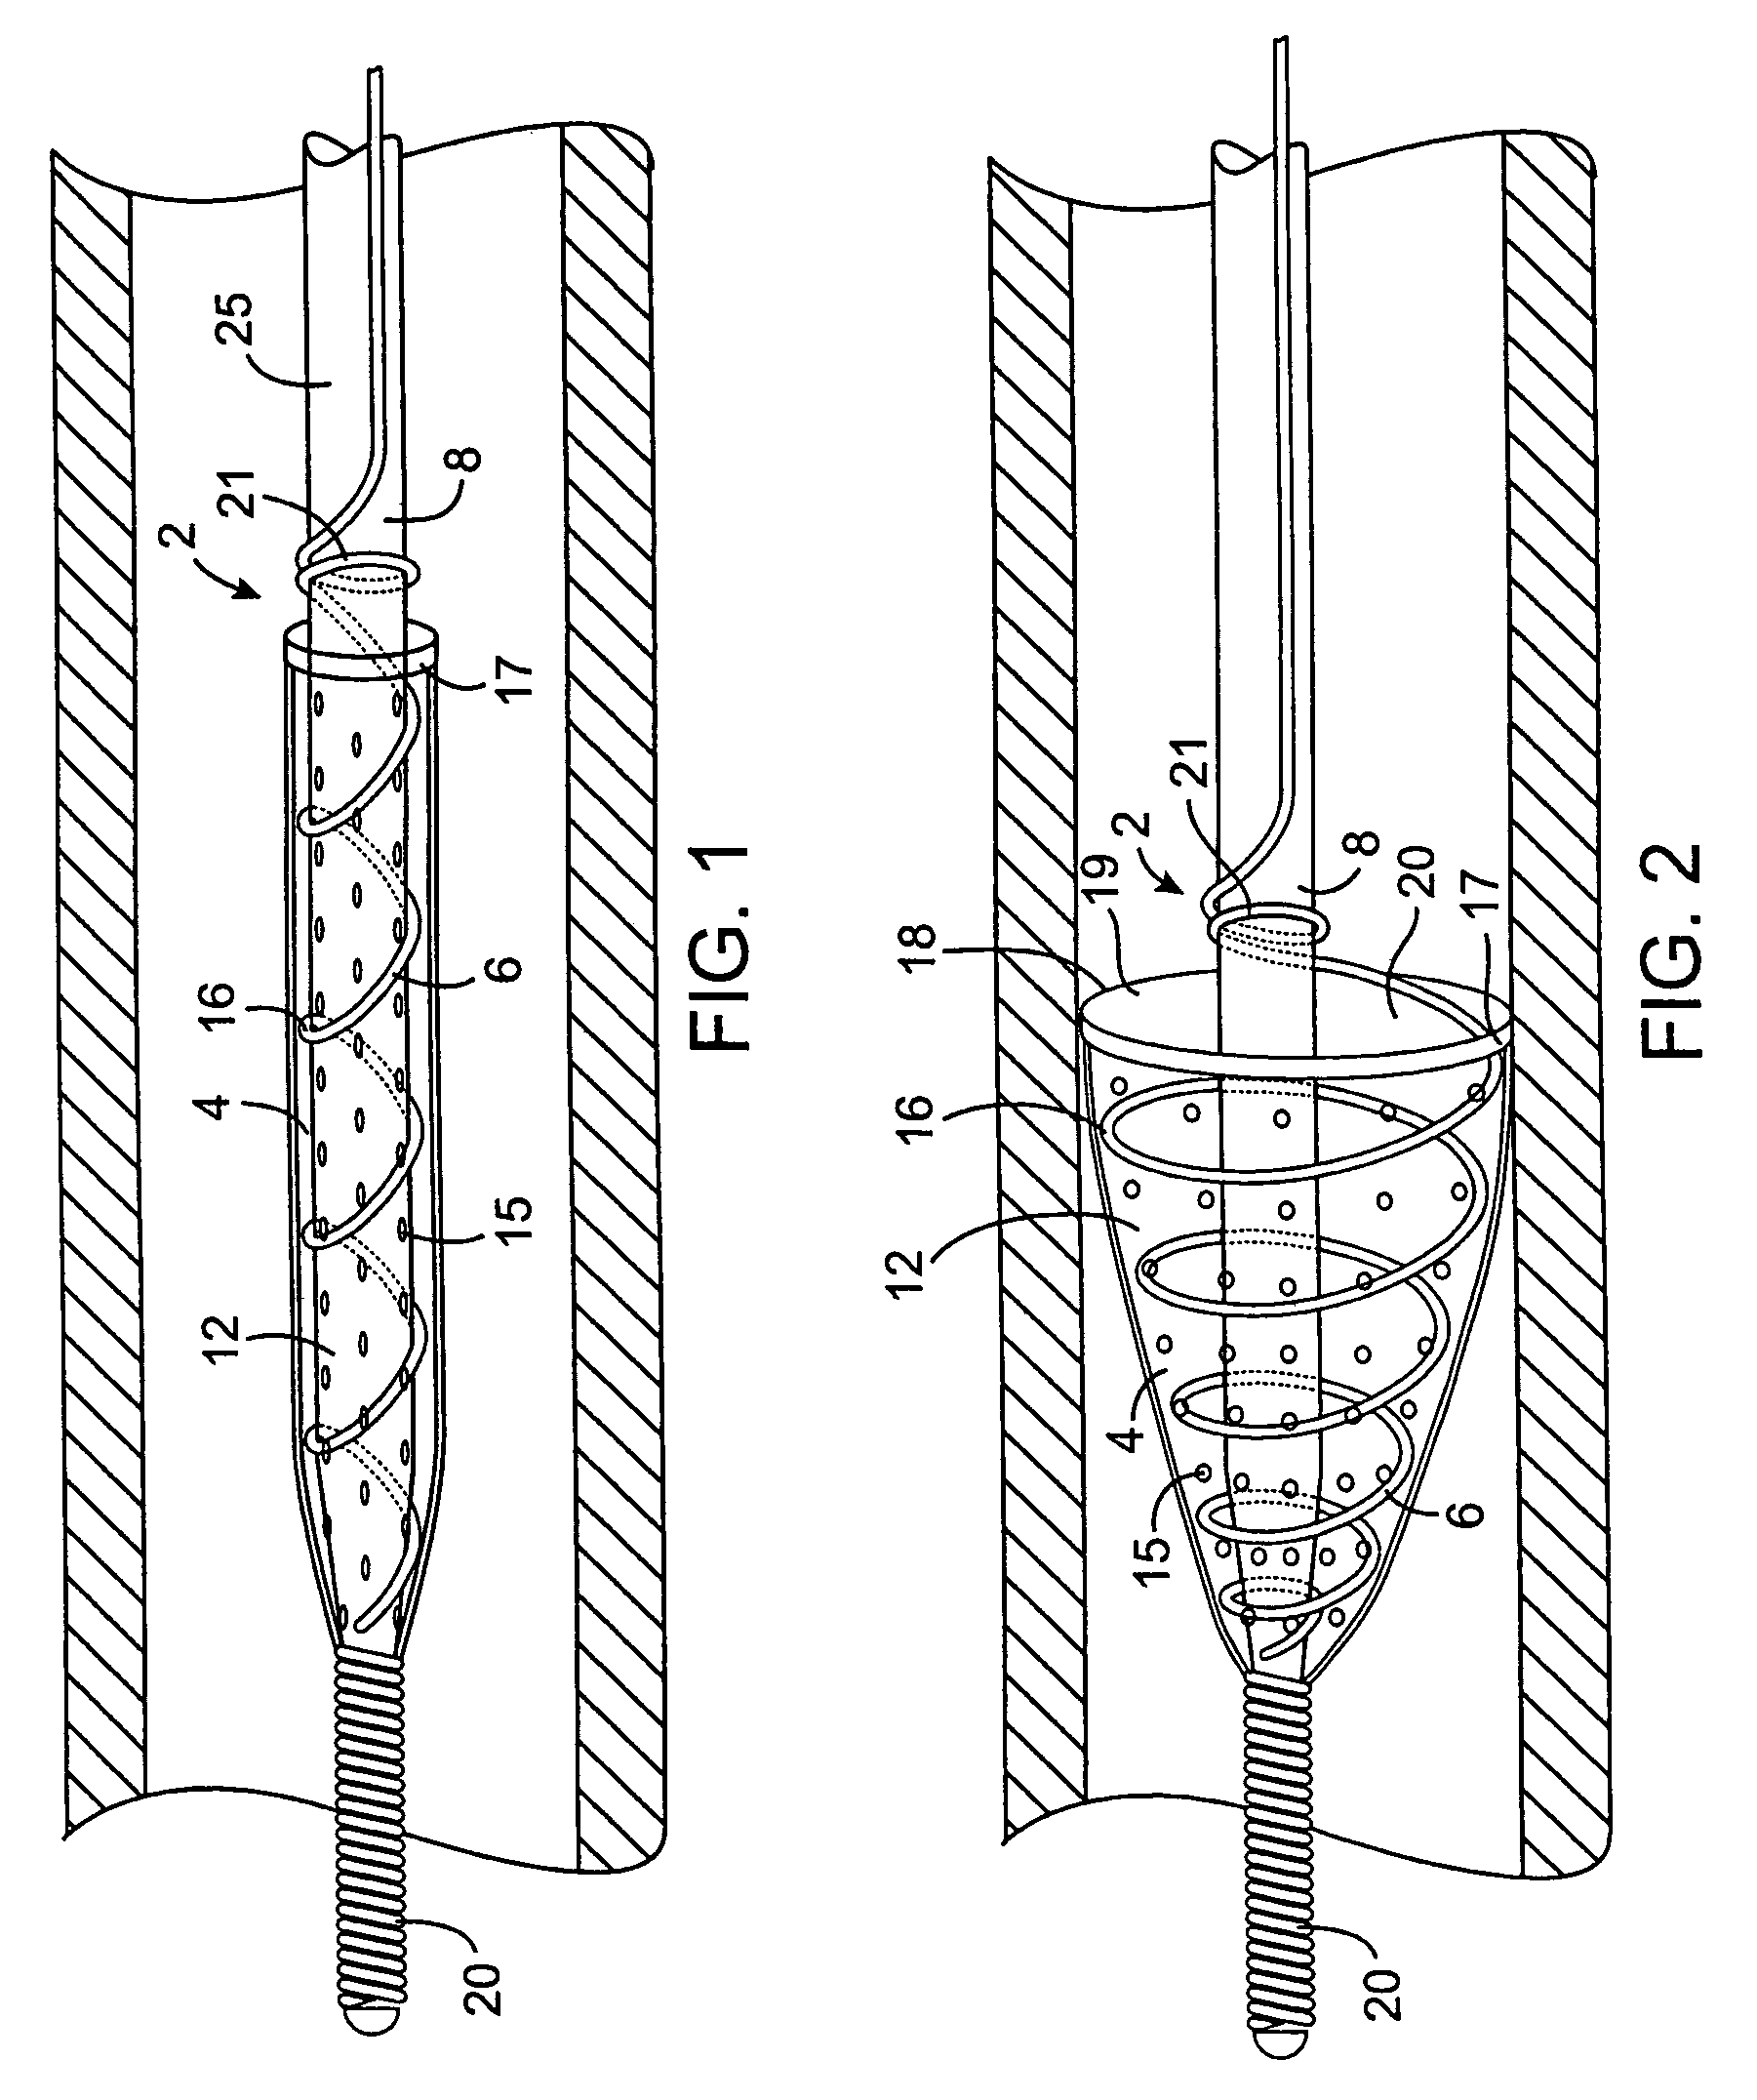 Methods and devices for filtering fluid flow through a body structure